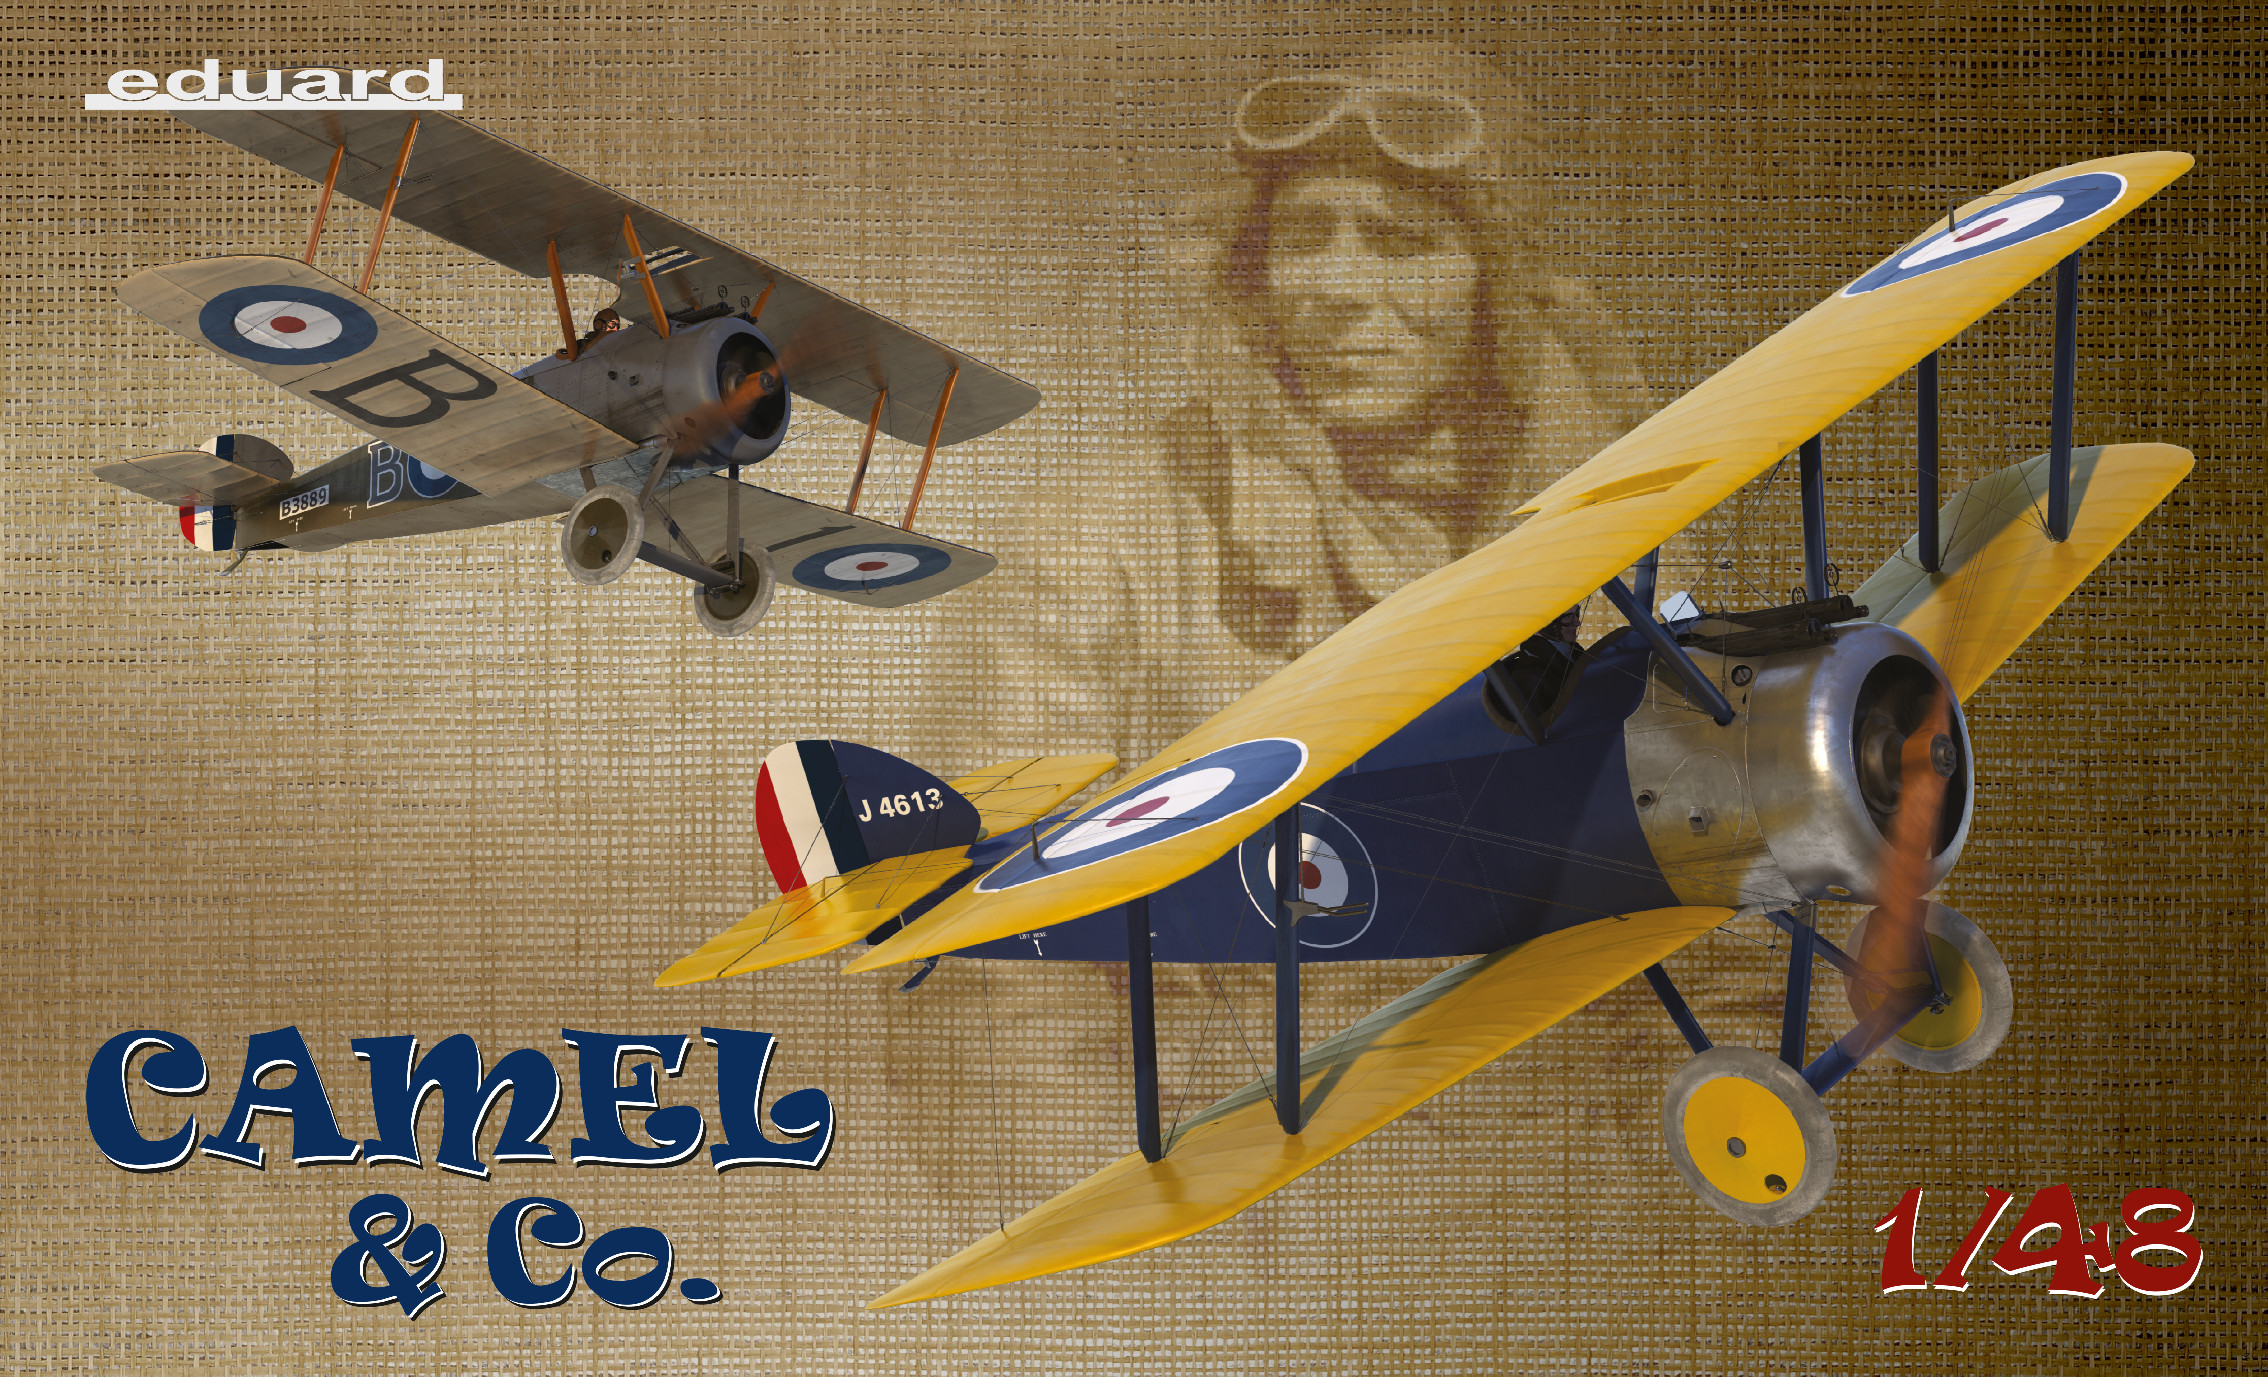 1/48 Sopwith F.1 Camel - BIGGLES & Co. (Limited edition - dual combo)